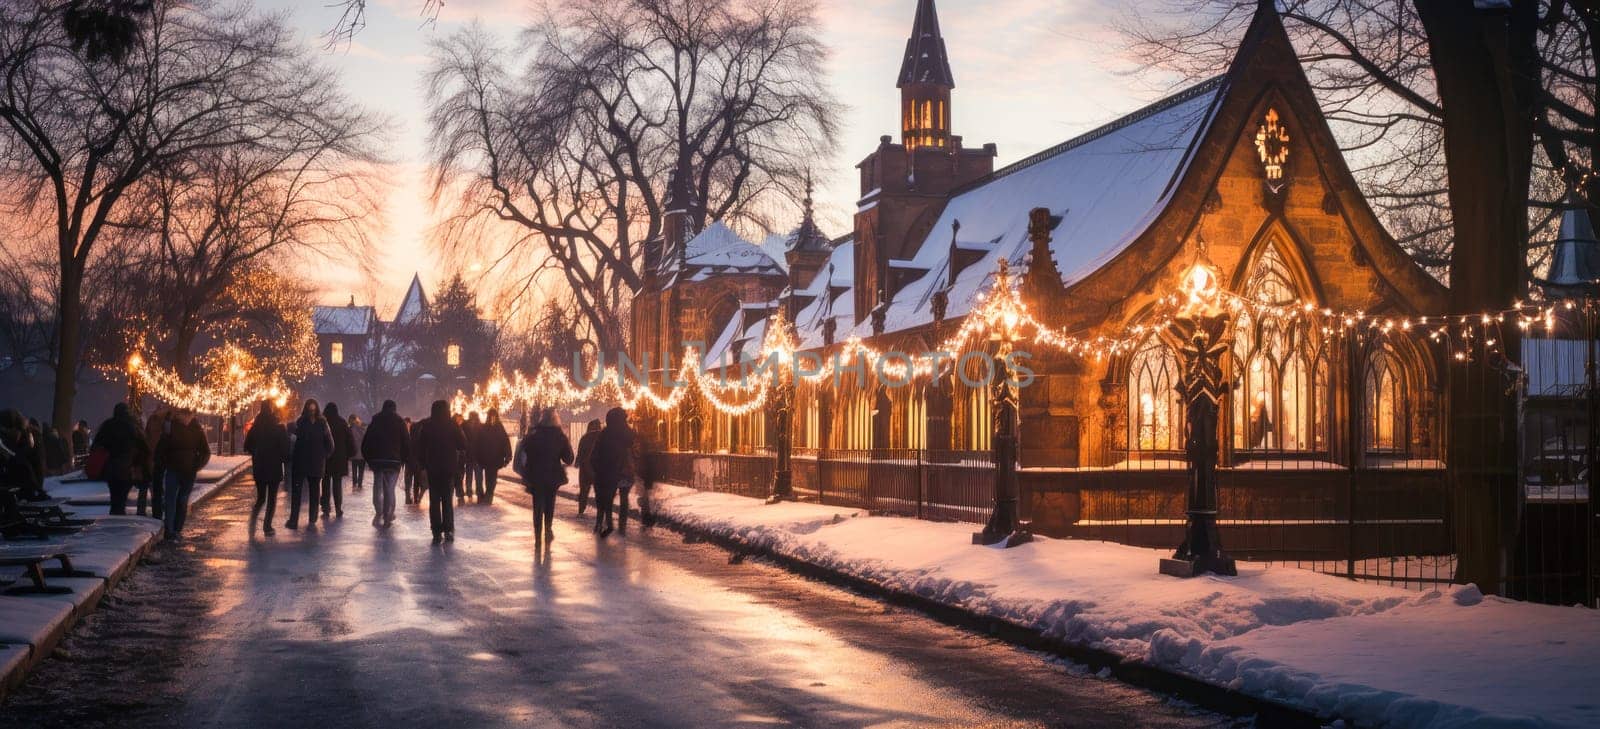 People enjoy the atmosphere of a Christmas market surrounded by festive decorations and the aroma of hot mulled wine.